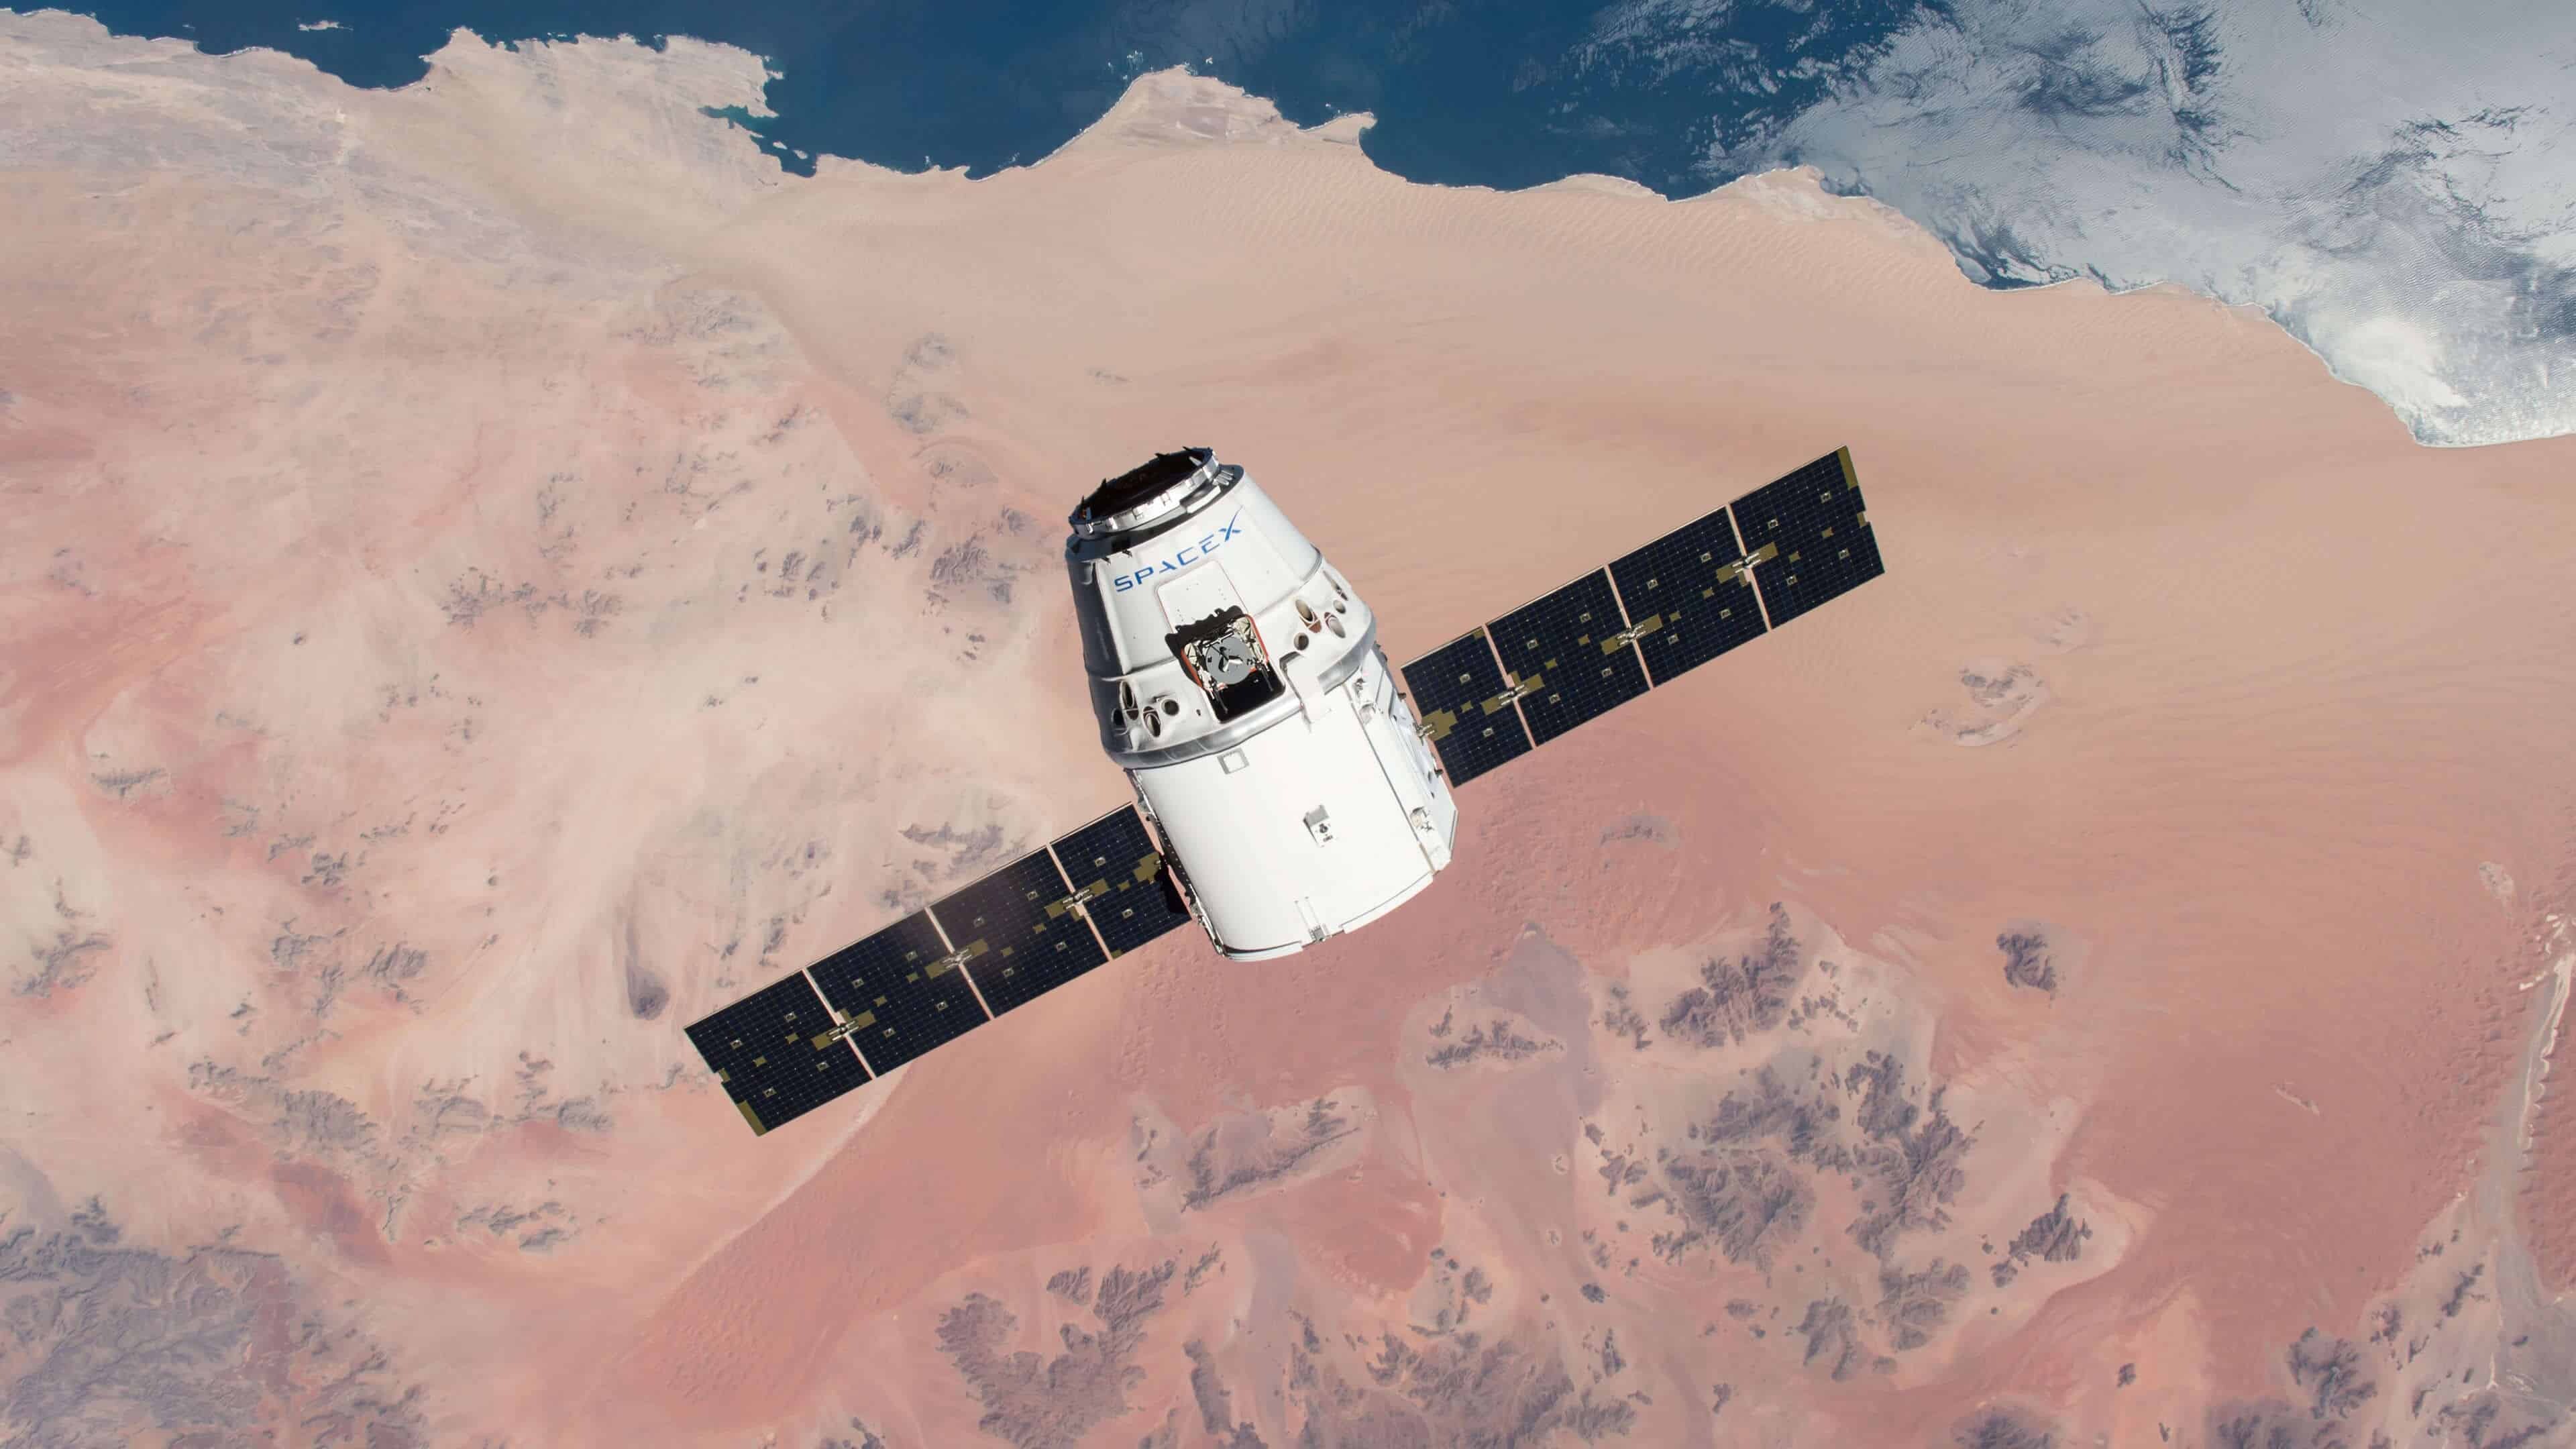 SpaceX: The Dragon spacecraft, capable of carrying up to 7 passengers to and from Earth orbit. 3840x2160 4K Background.